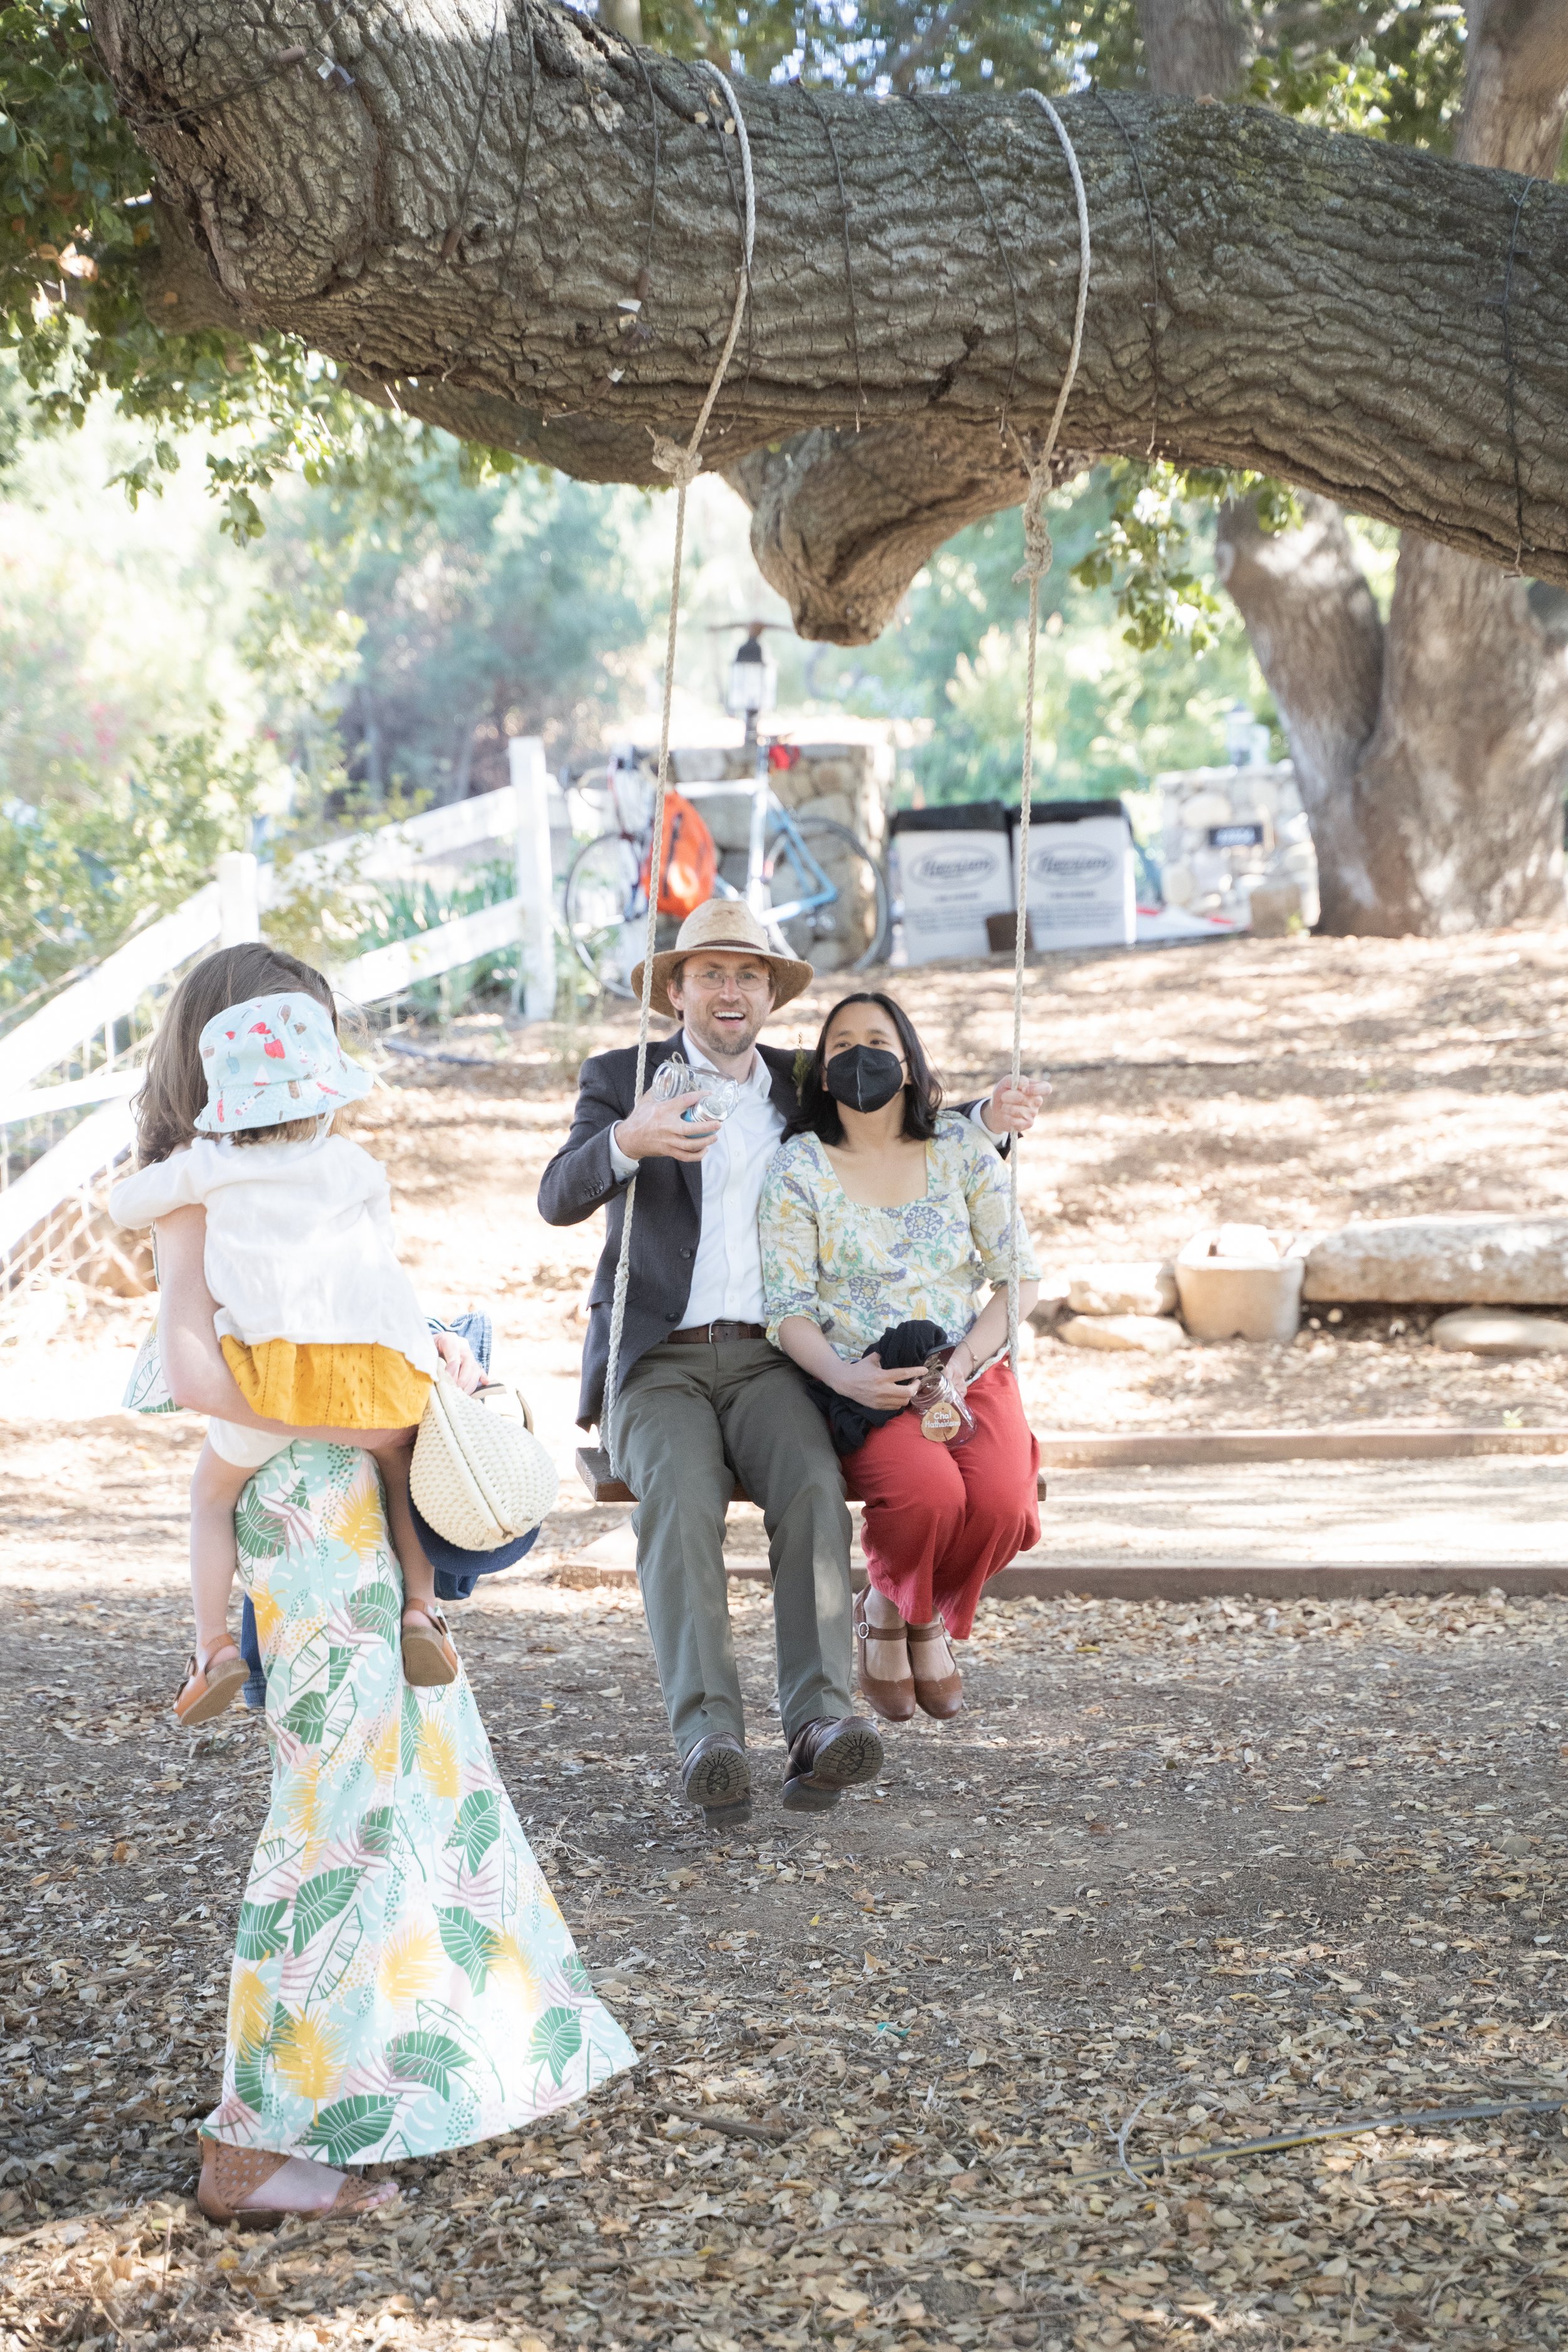 www.santabarbarawedding.com | Events by Fran | Jacob Grant Photography | Shiela Morales | Guests Swinging from the Tree